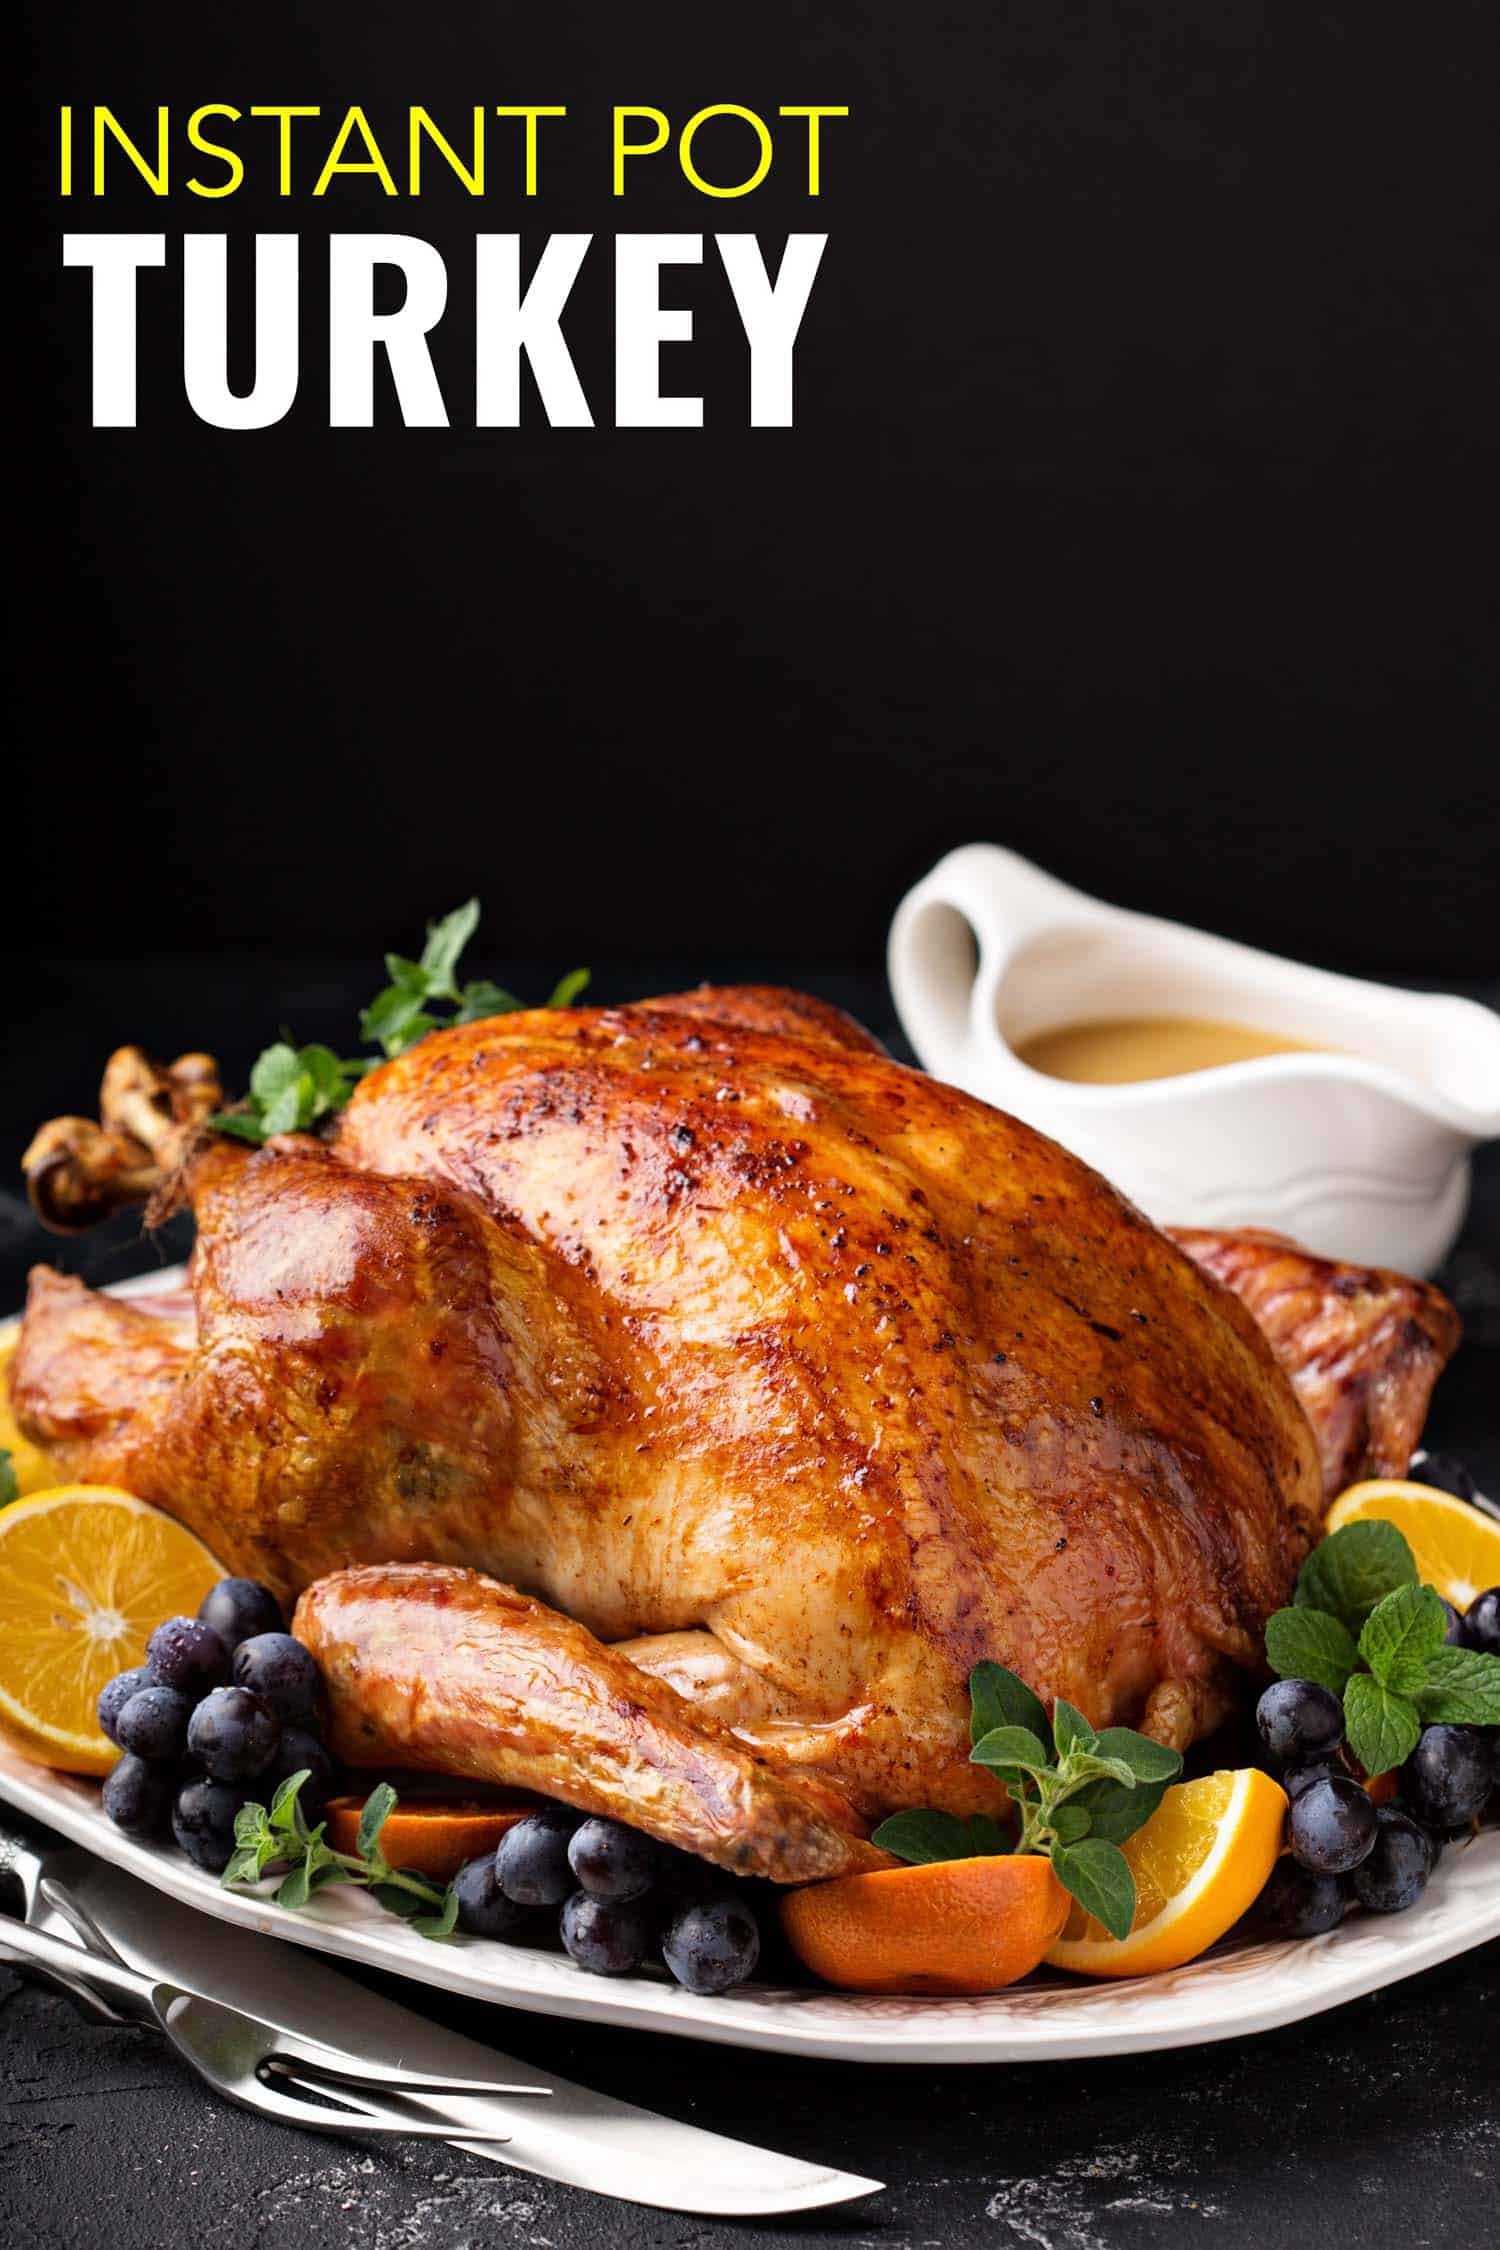 turkey cooked in instant pot on table with side dishes for thanksgiving